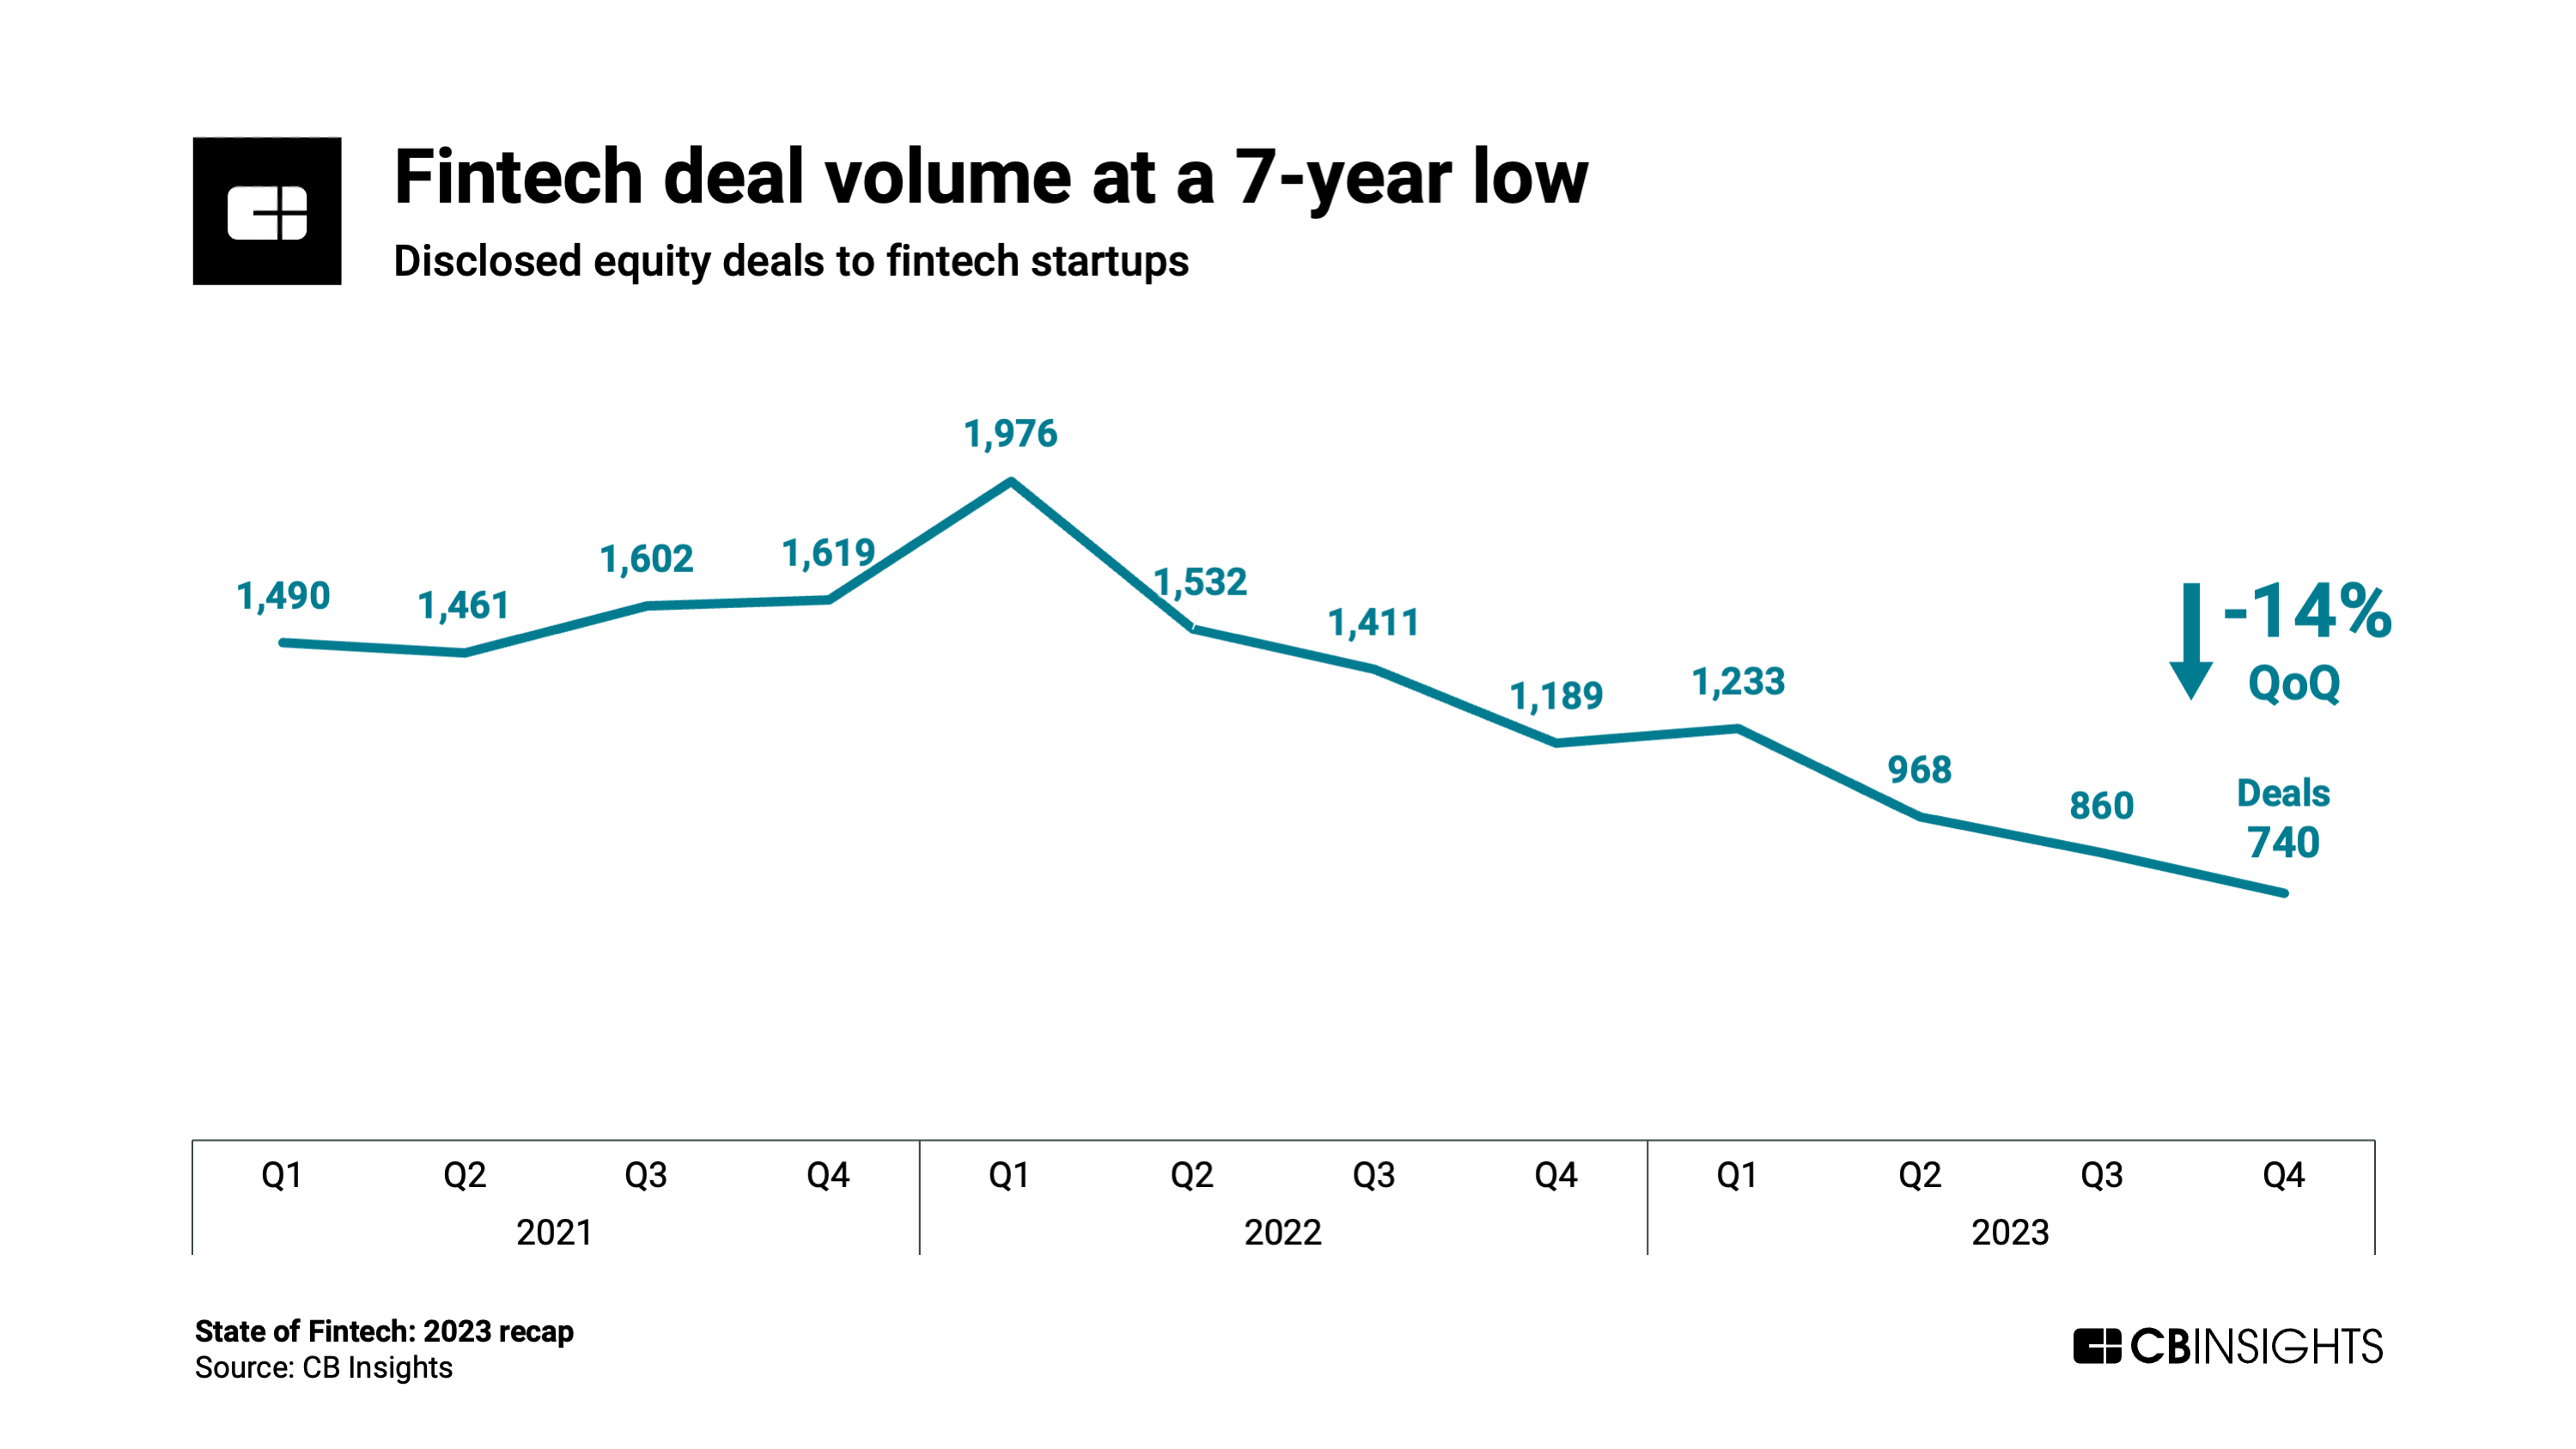 Fintech deal volume at a 7-year low